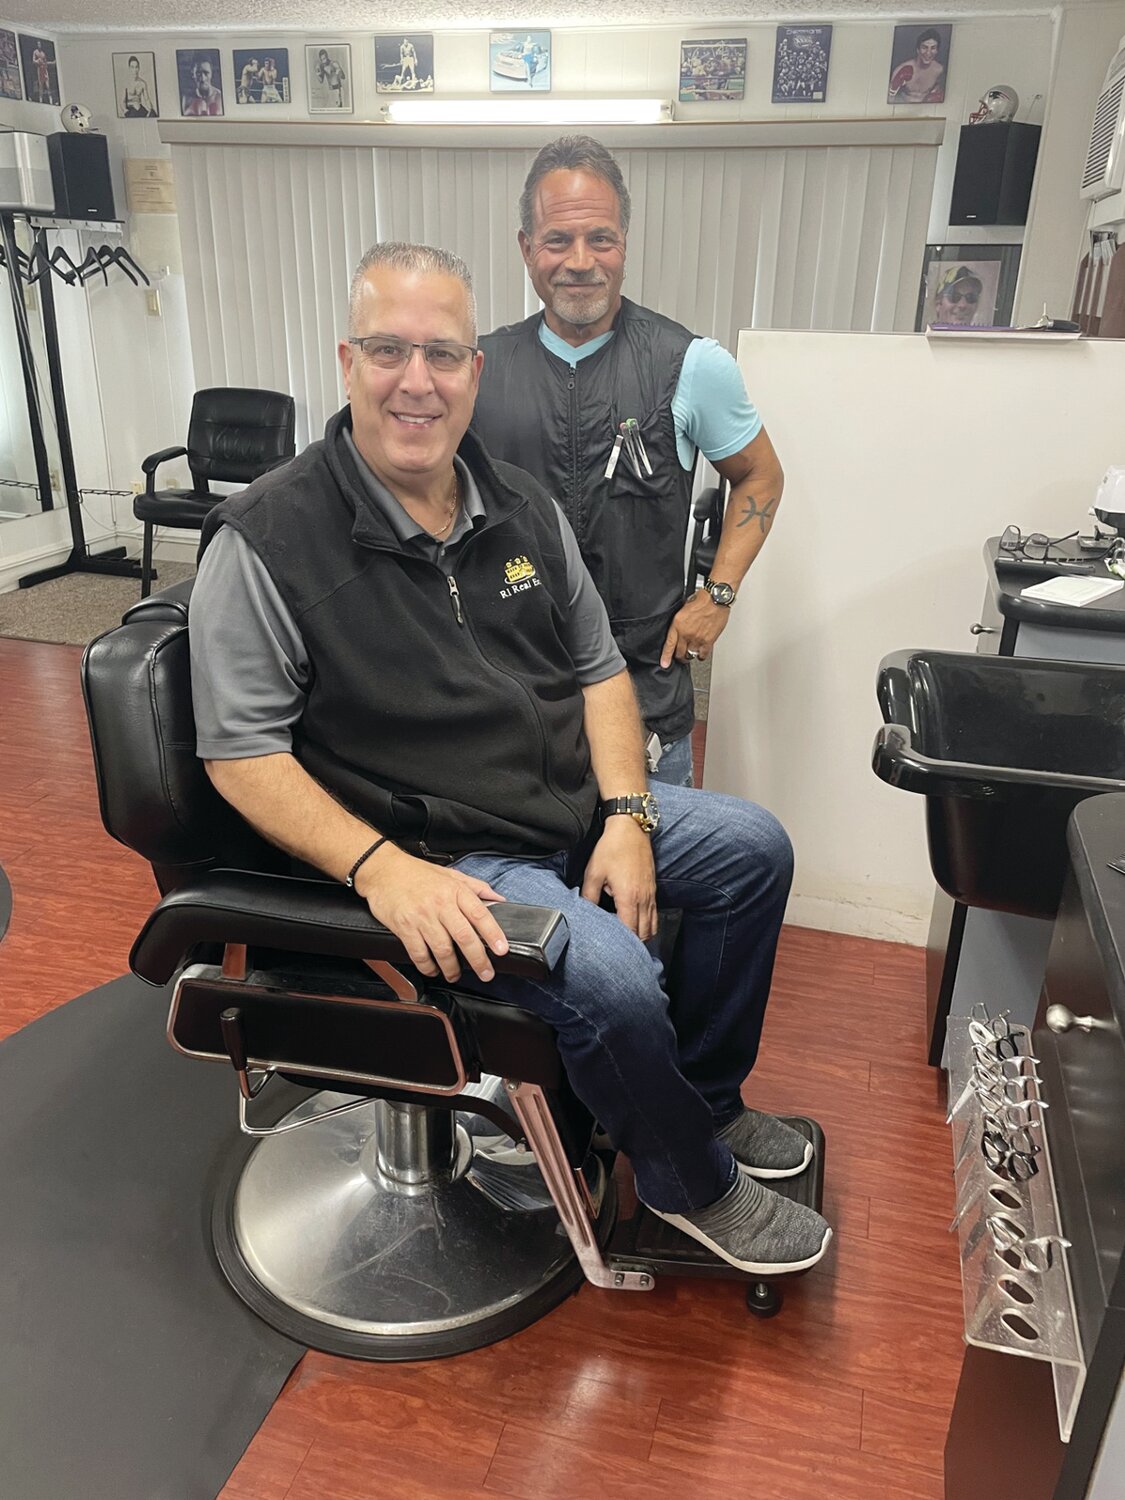 Dave takes a break from his job to greet longtime customer and loyal friend Tim Silvia (who also happens to be well-known throughout the region as a successful realtor at RI Real Estate Services!)